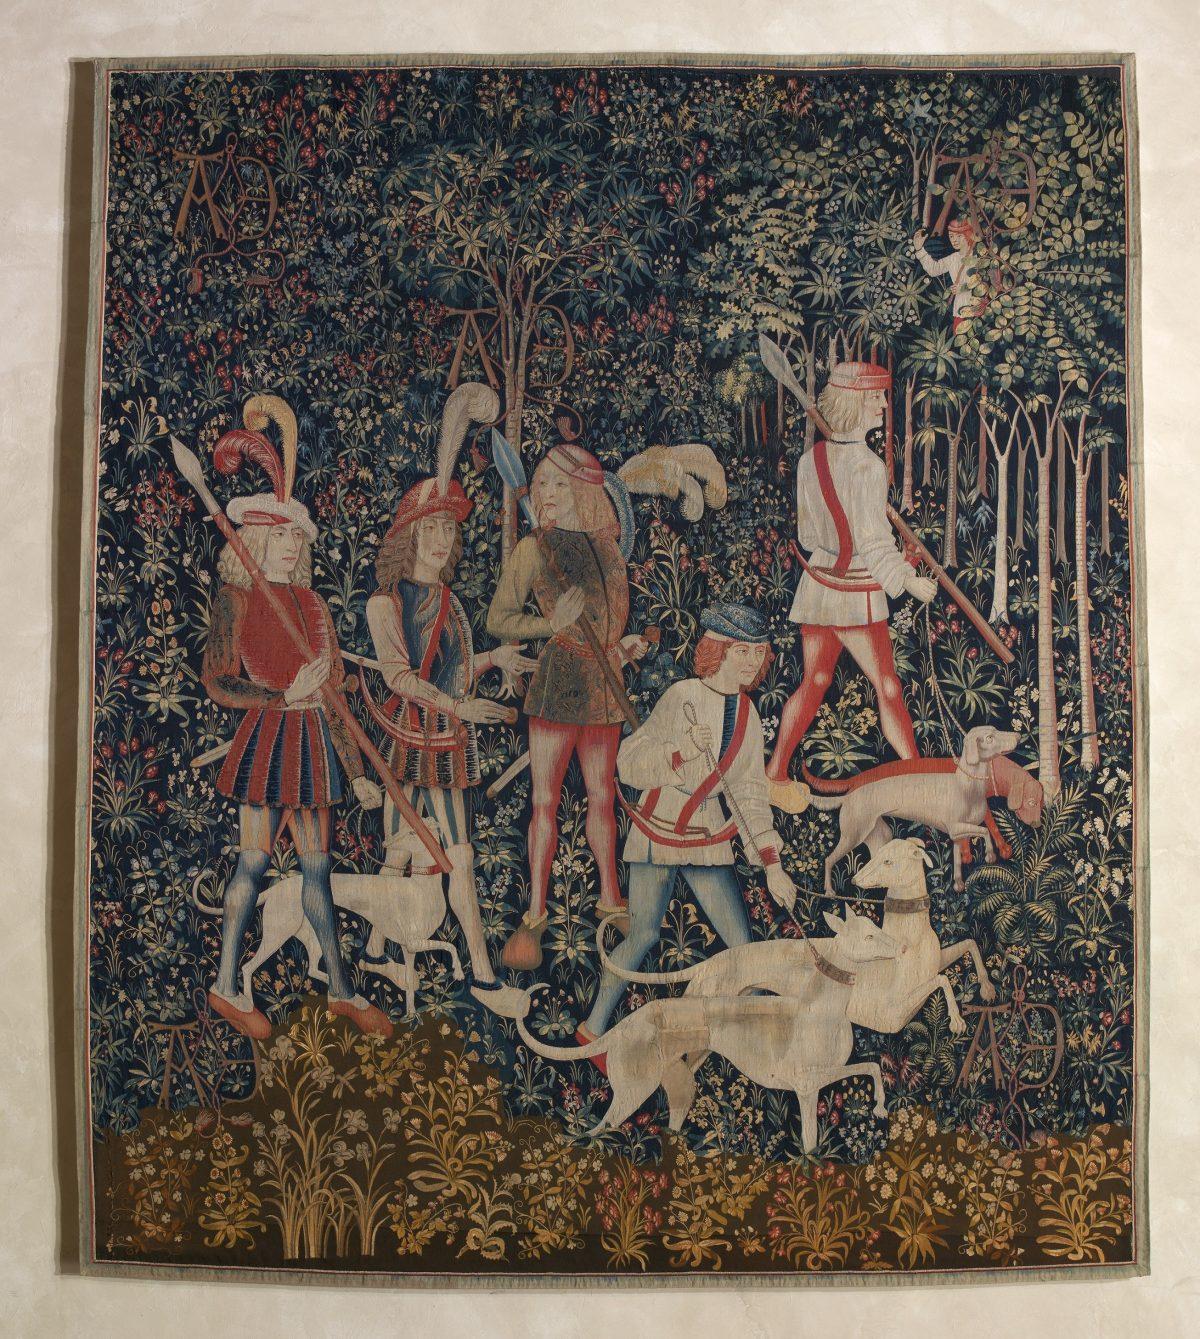 “The Hunters Enter the Woods,” 1495–1505, South Netherlandish. Wool warp with wool, silk, silver, and gilt wefts; 145 inches by 124 inches. Gift of John D. Rockefeller Jr., 1937, The Met Cloisters. (The Metropolitan Museum of Art )